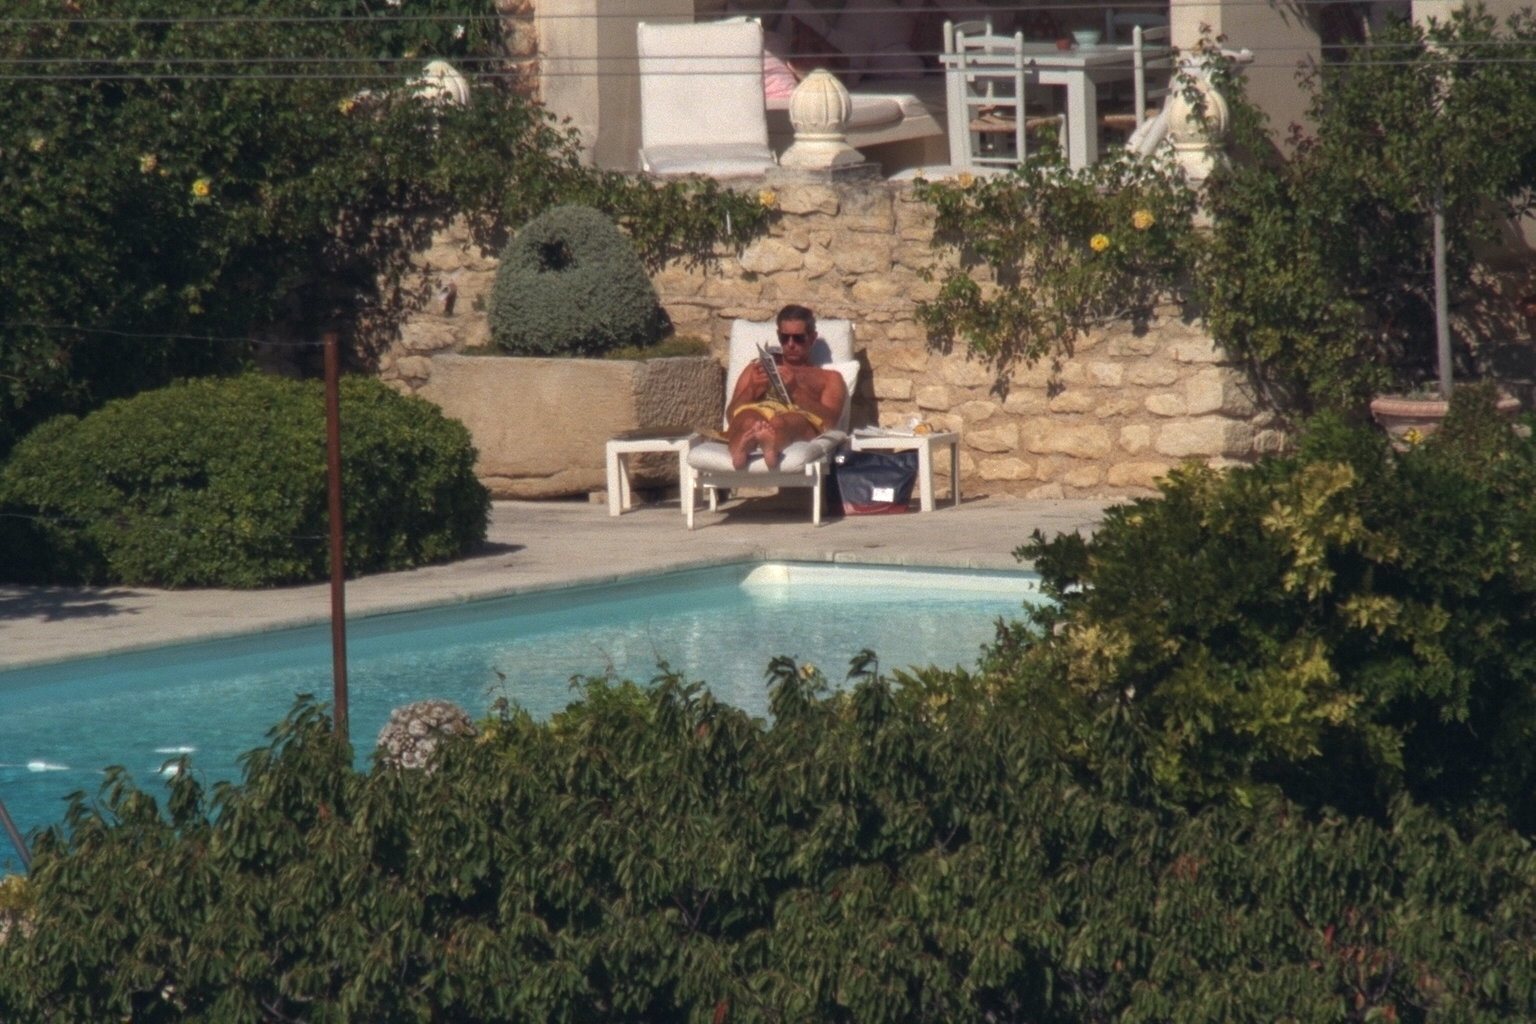 PRINCE CHARLES ON HOLIDAY IN FRANCE